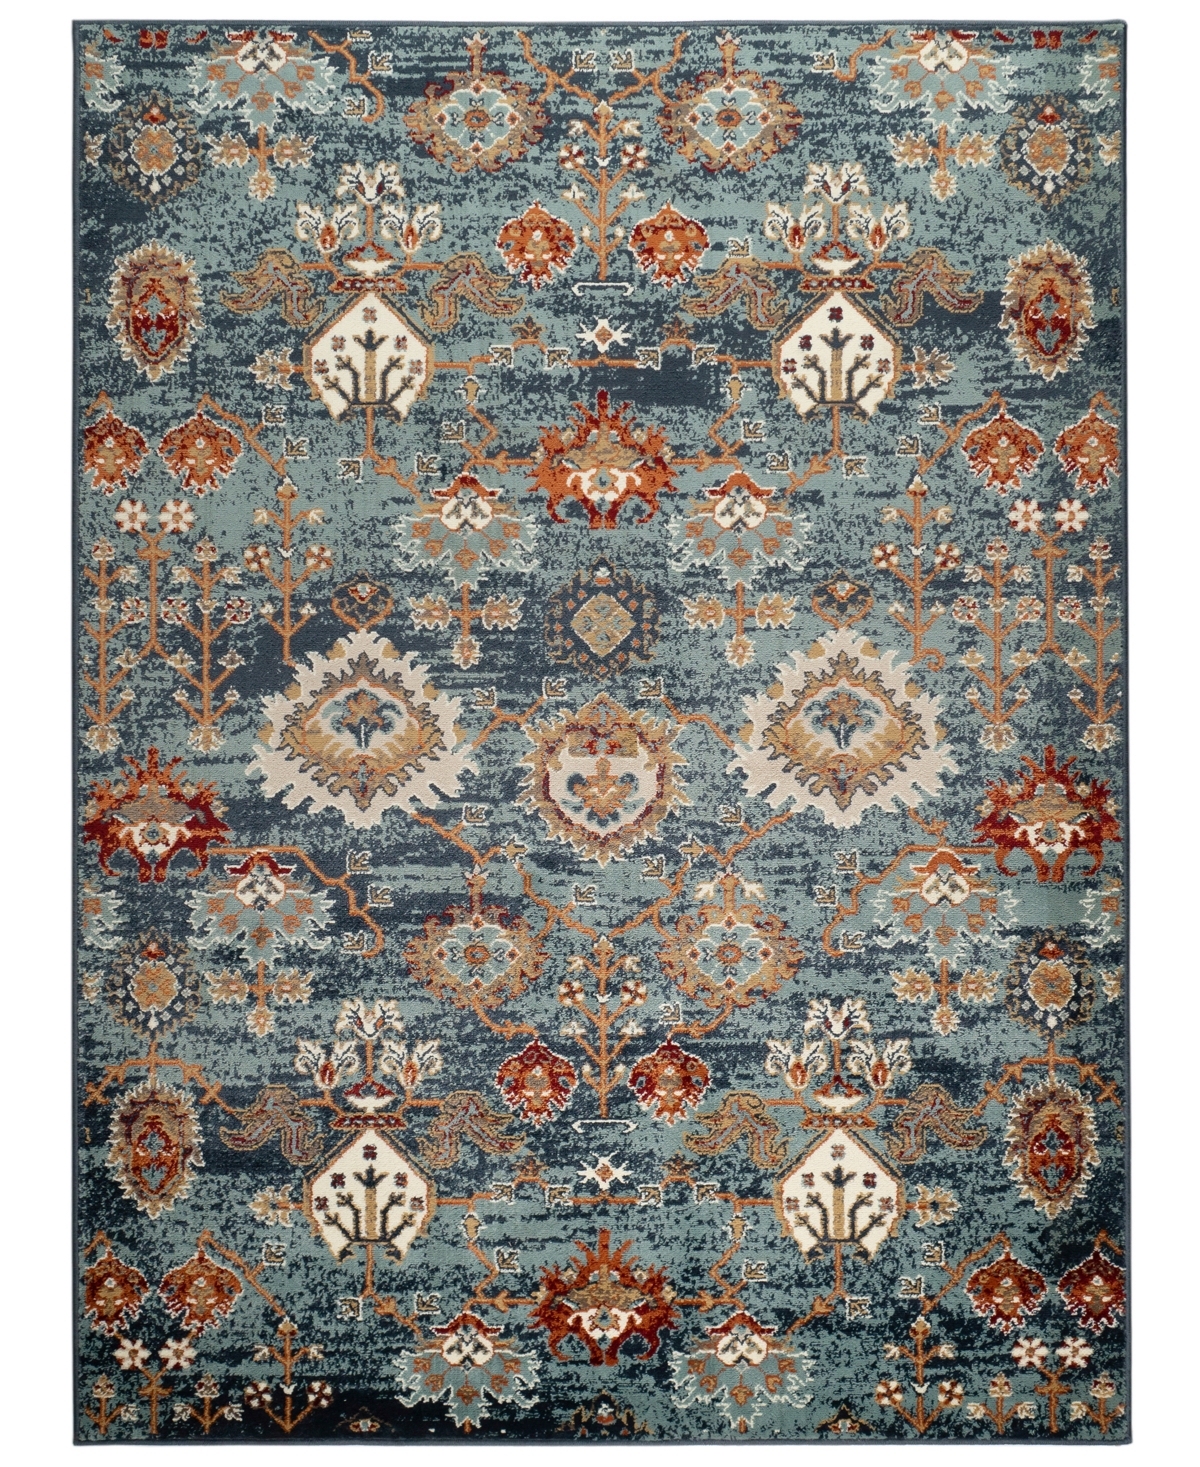 Amer Rugs Allure Alice 7'9" X 9'9" Area Rug In Teal,blue